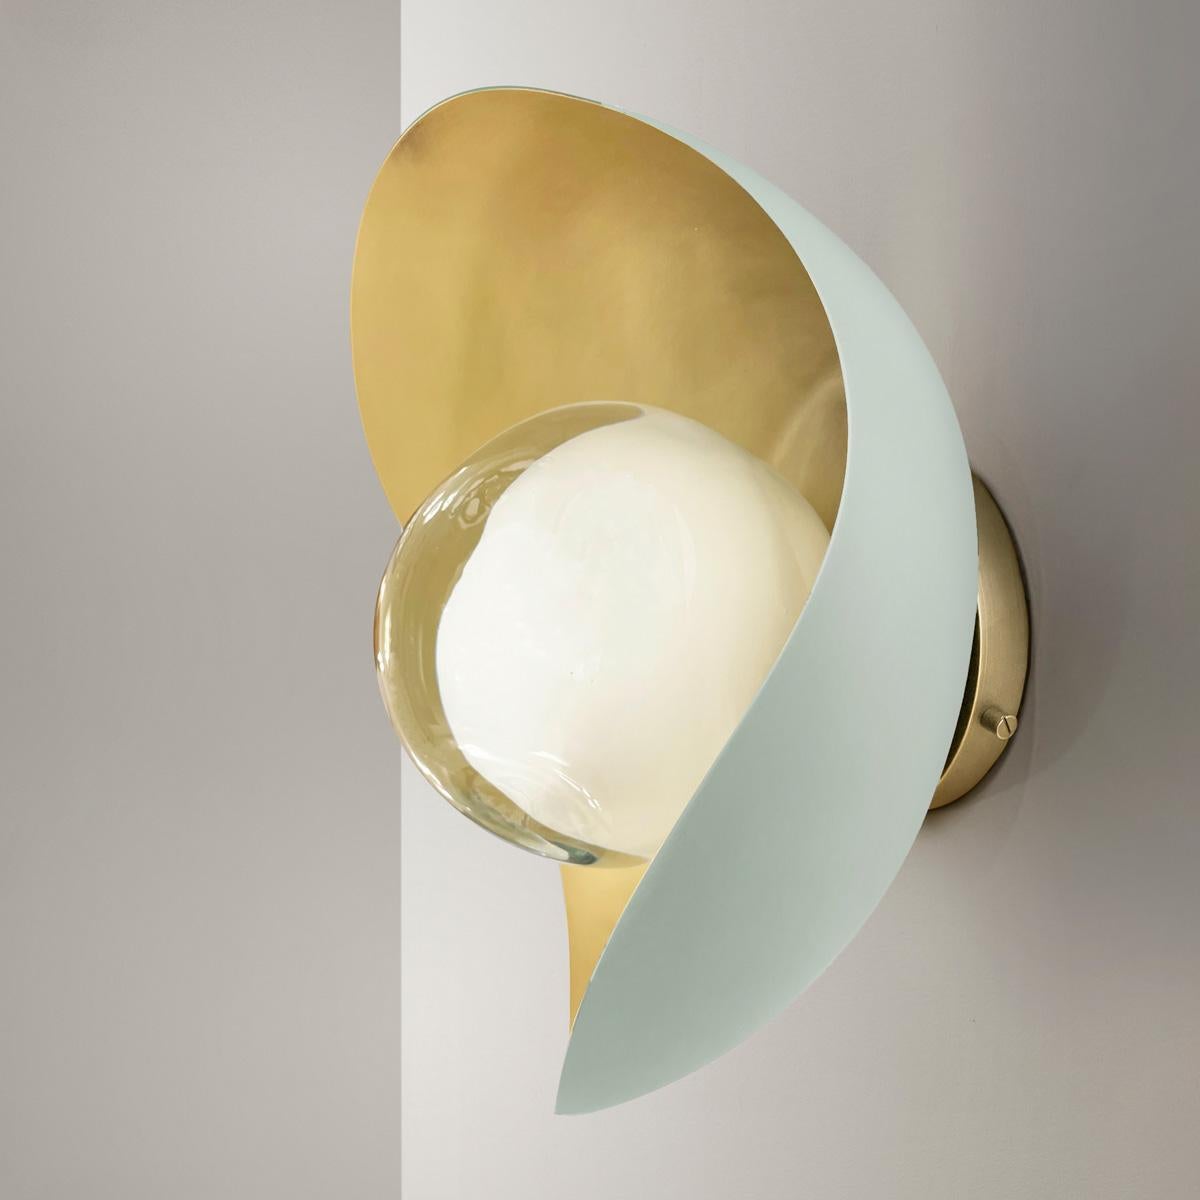 Perla Wall Light by Gaspare Asaro-Brass Finish For Sale 1